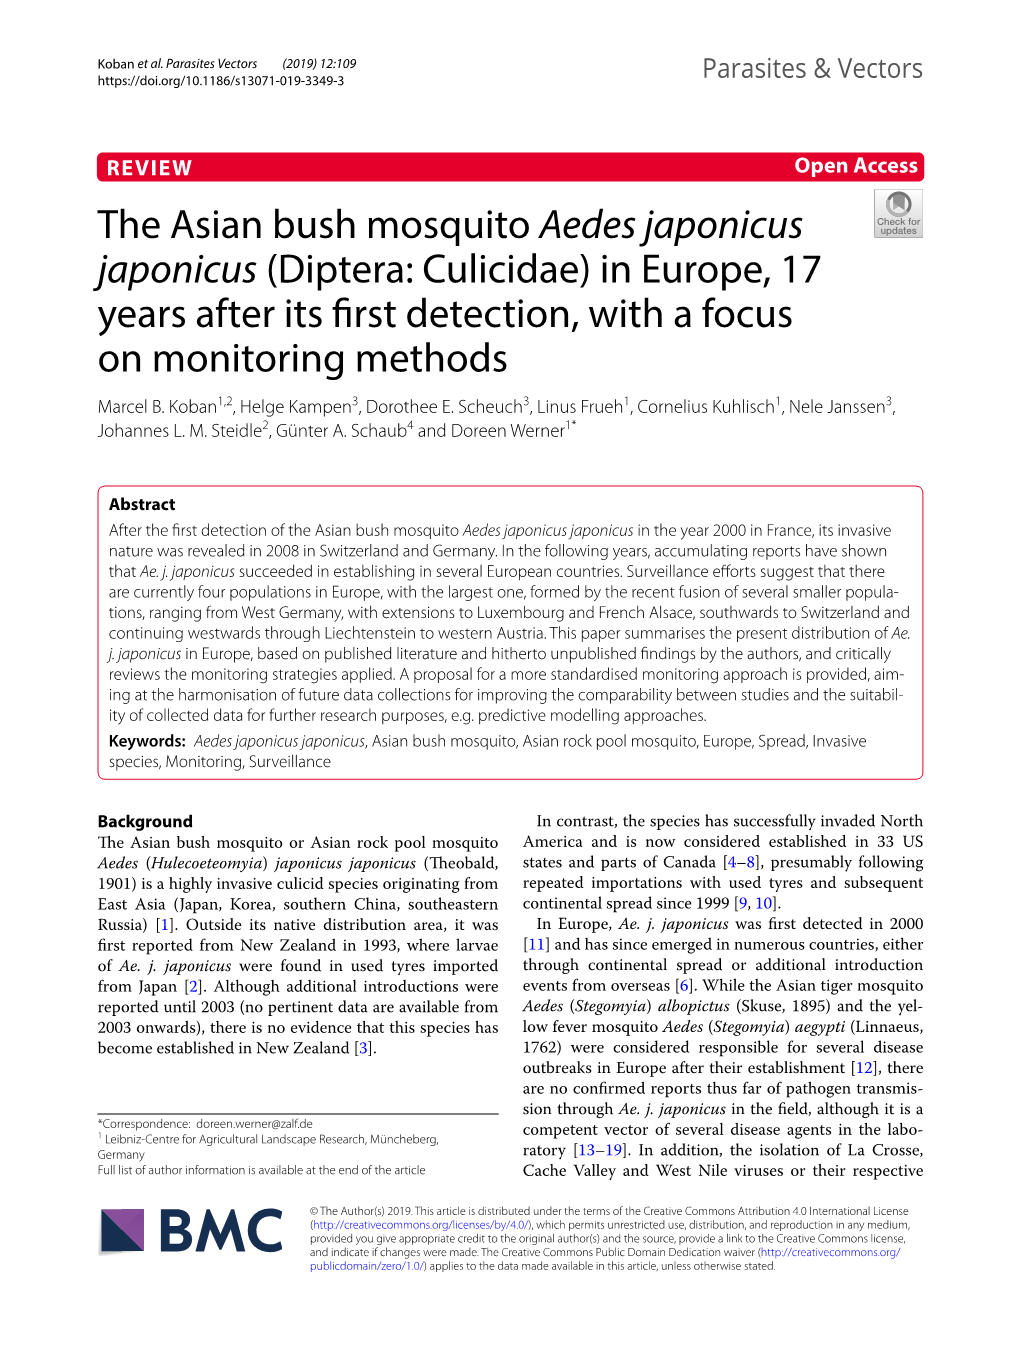 The Asian Bush Mosquito Aedes Japonicus Japonicus (Diptera: Culicidae) in Europe, 17 Years After Its Frst Detection, with a Focus on Monitoring Methods Marcel B